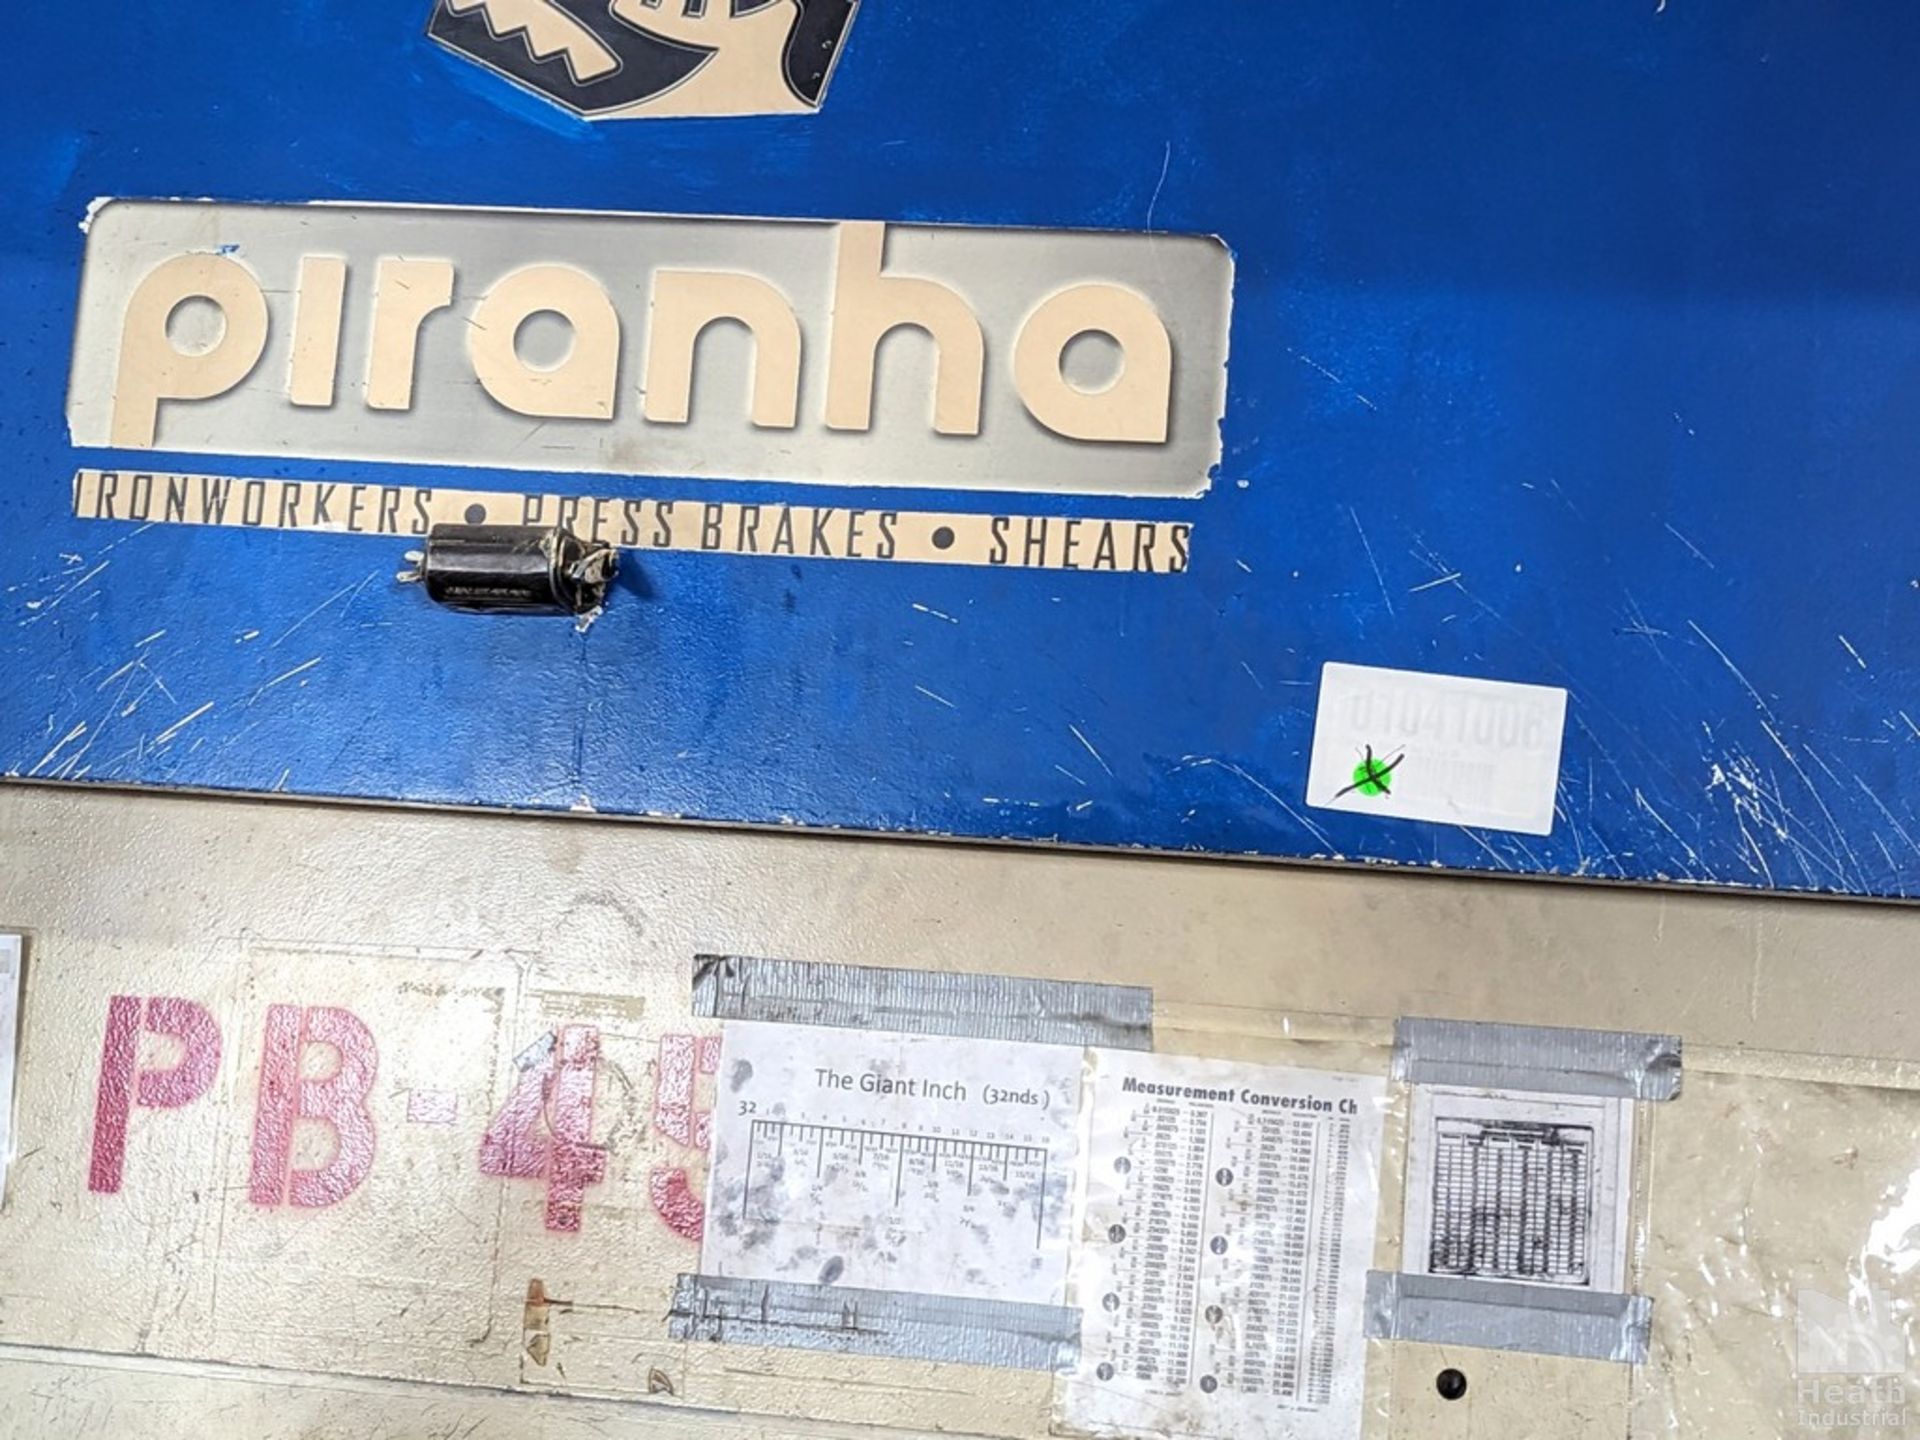 Piranha 175 Ton Model 17512 Hydraulic Press Brake, s/n 17512-1042, 144” Overall Length of Bed & Ram, - Image 2 of 7